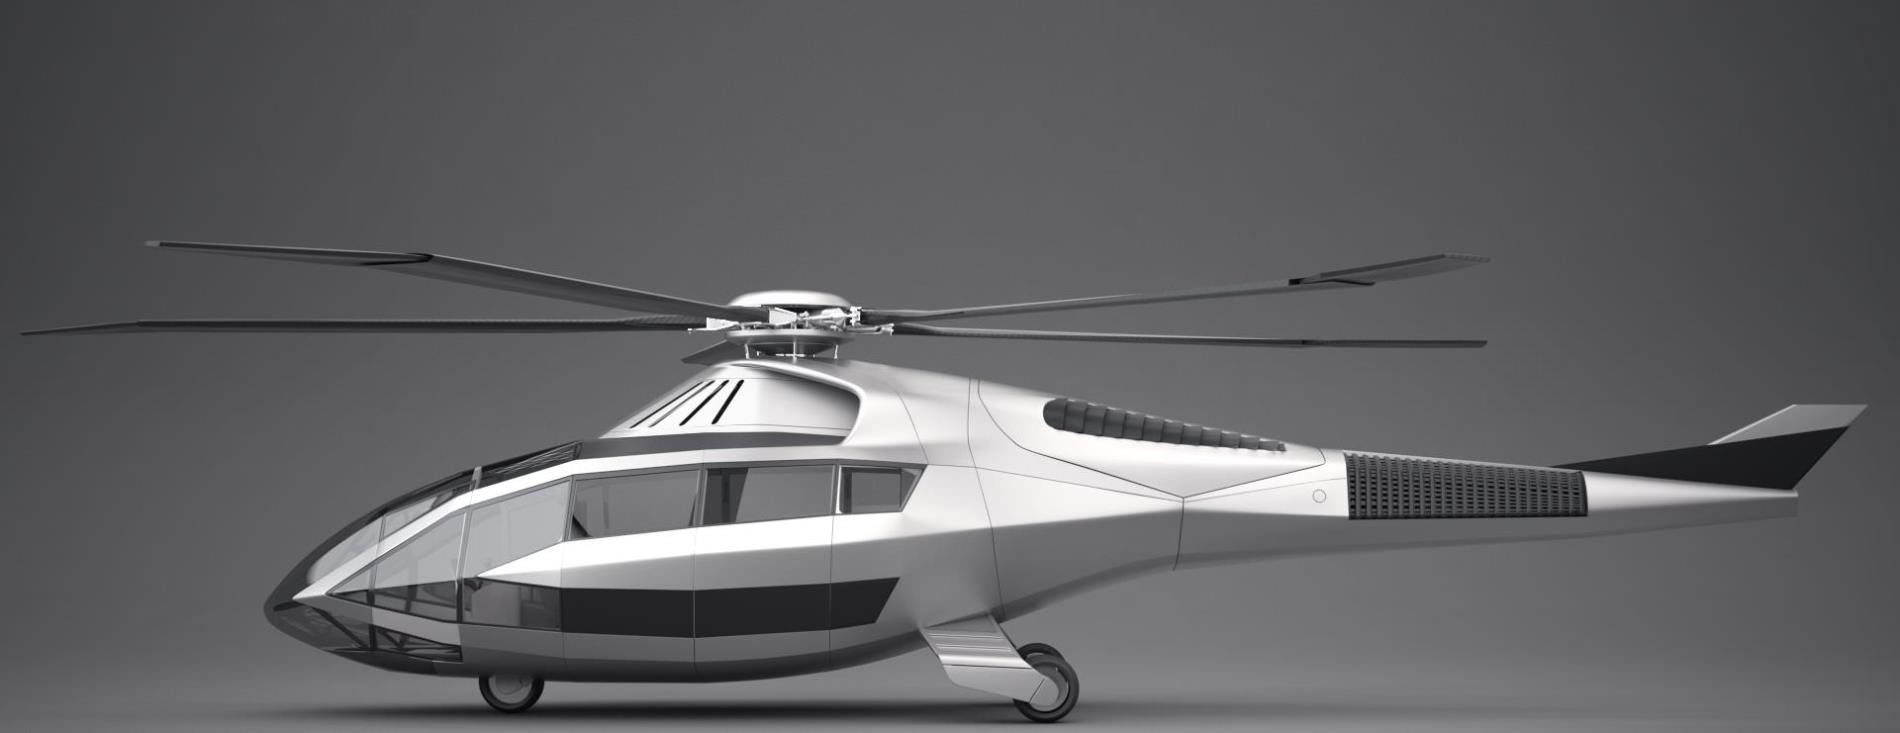 Bell Helicopter Continues to Shape the Future of Vertical Lift